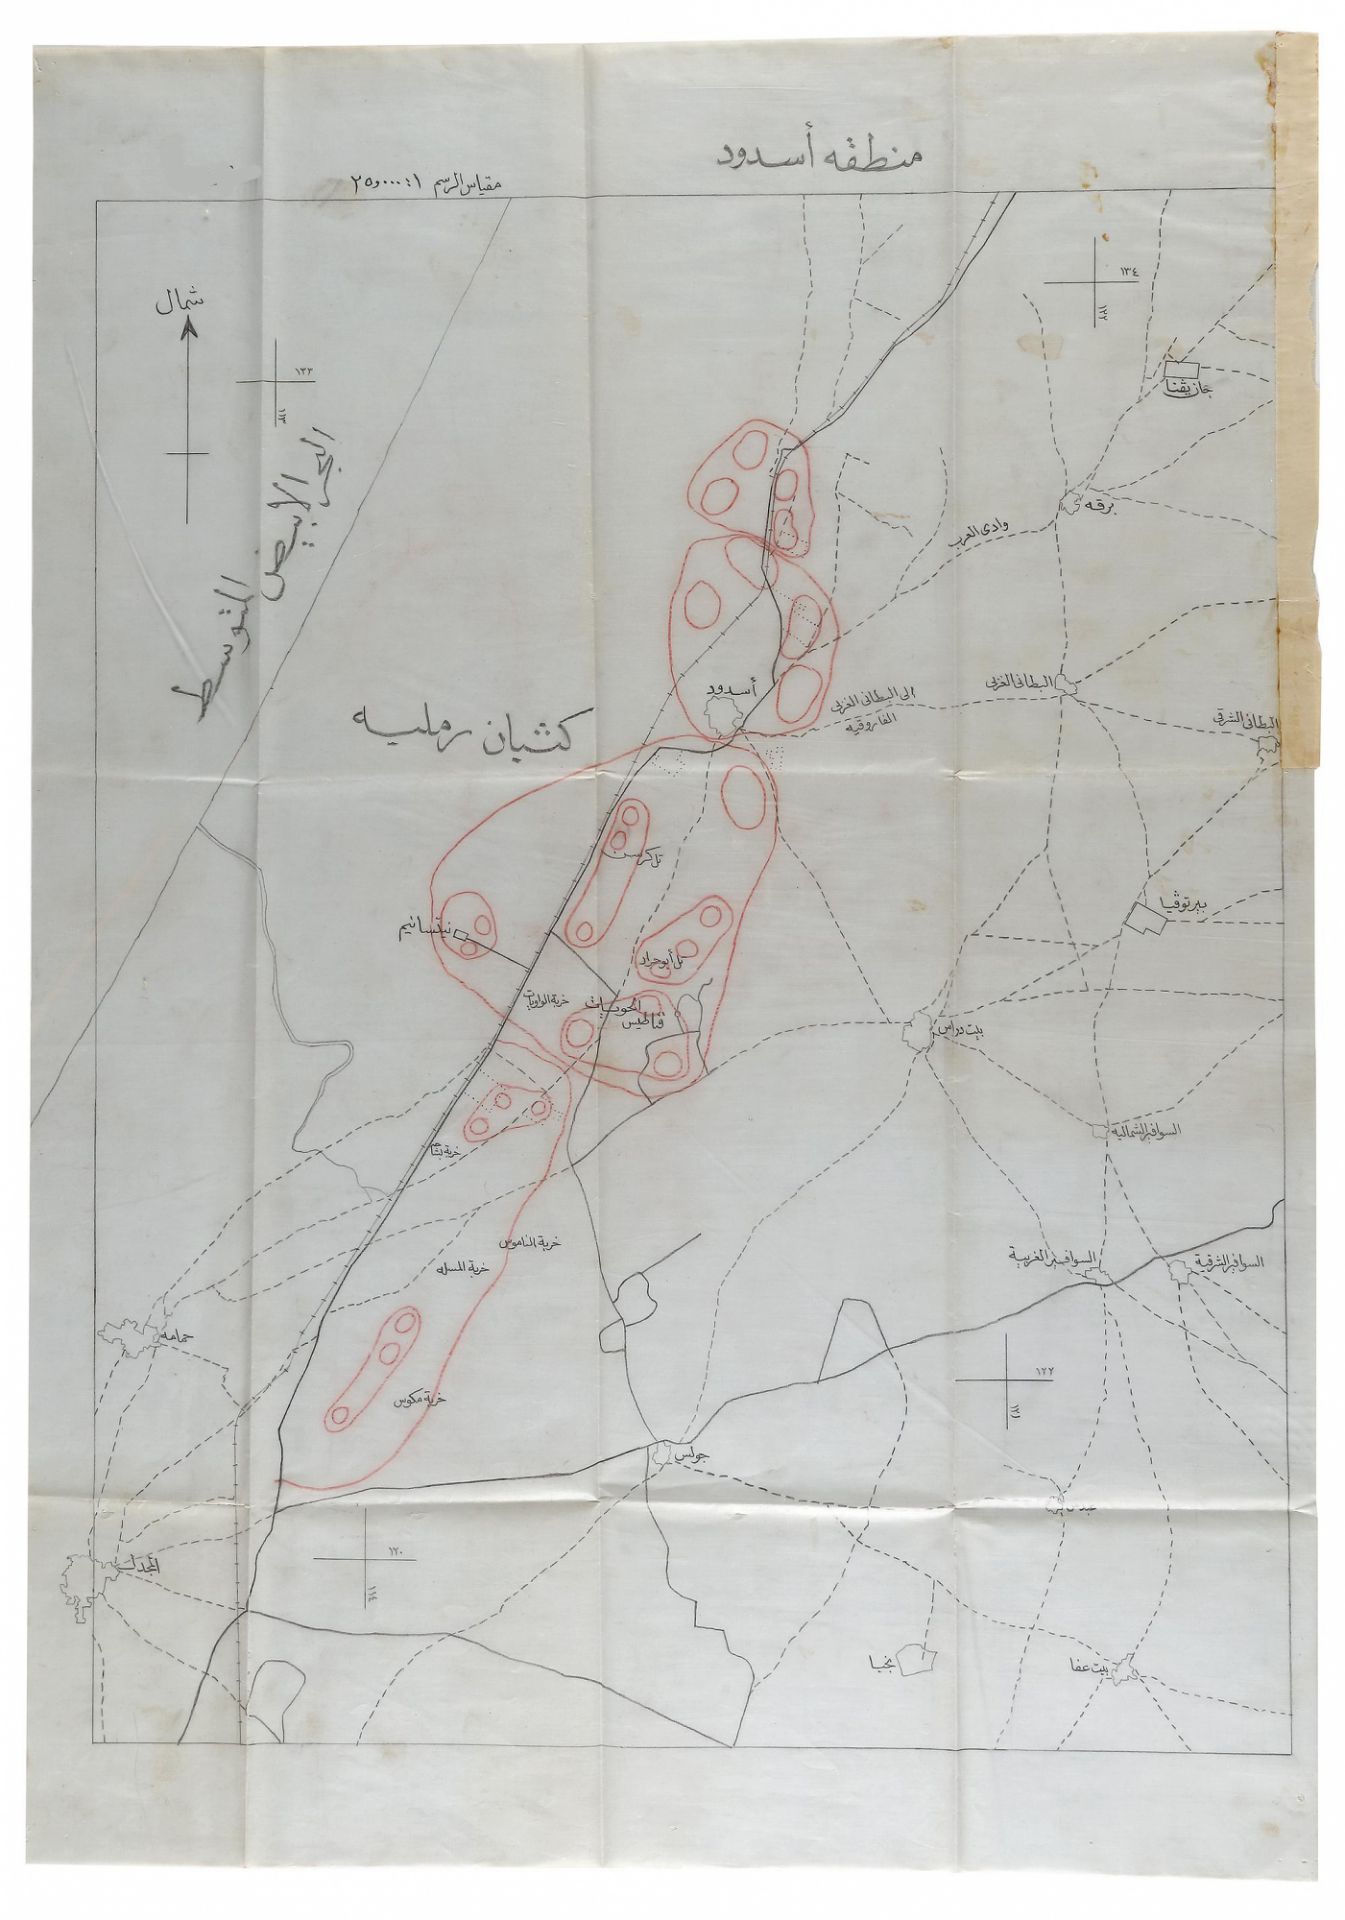 MIITARY MAPS AND DOCUMENTS SHOWING THE TOWNS/VILLAGES IN ASHDOD AND GAZA IN PALESTINE, PRINTED 5TH O - Image 5 of 6